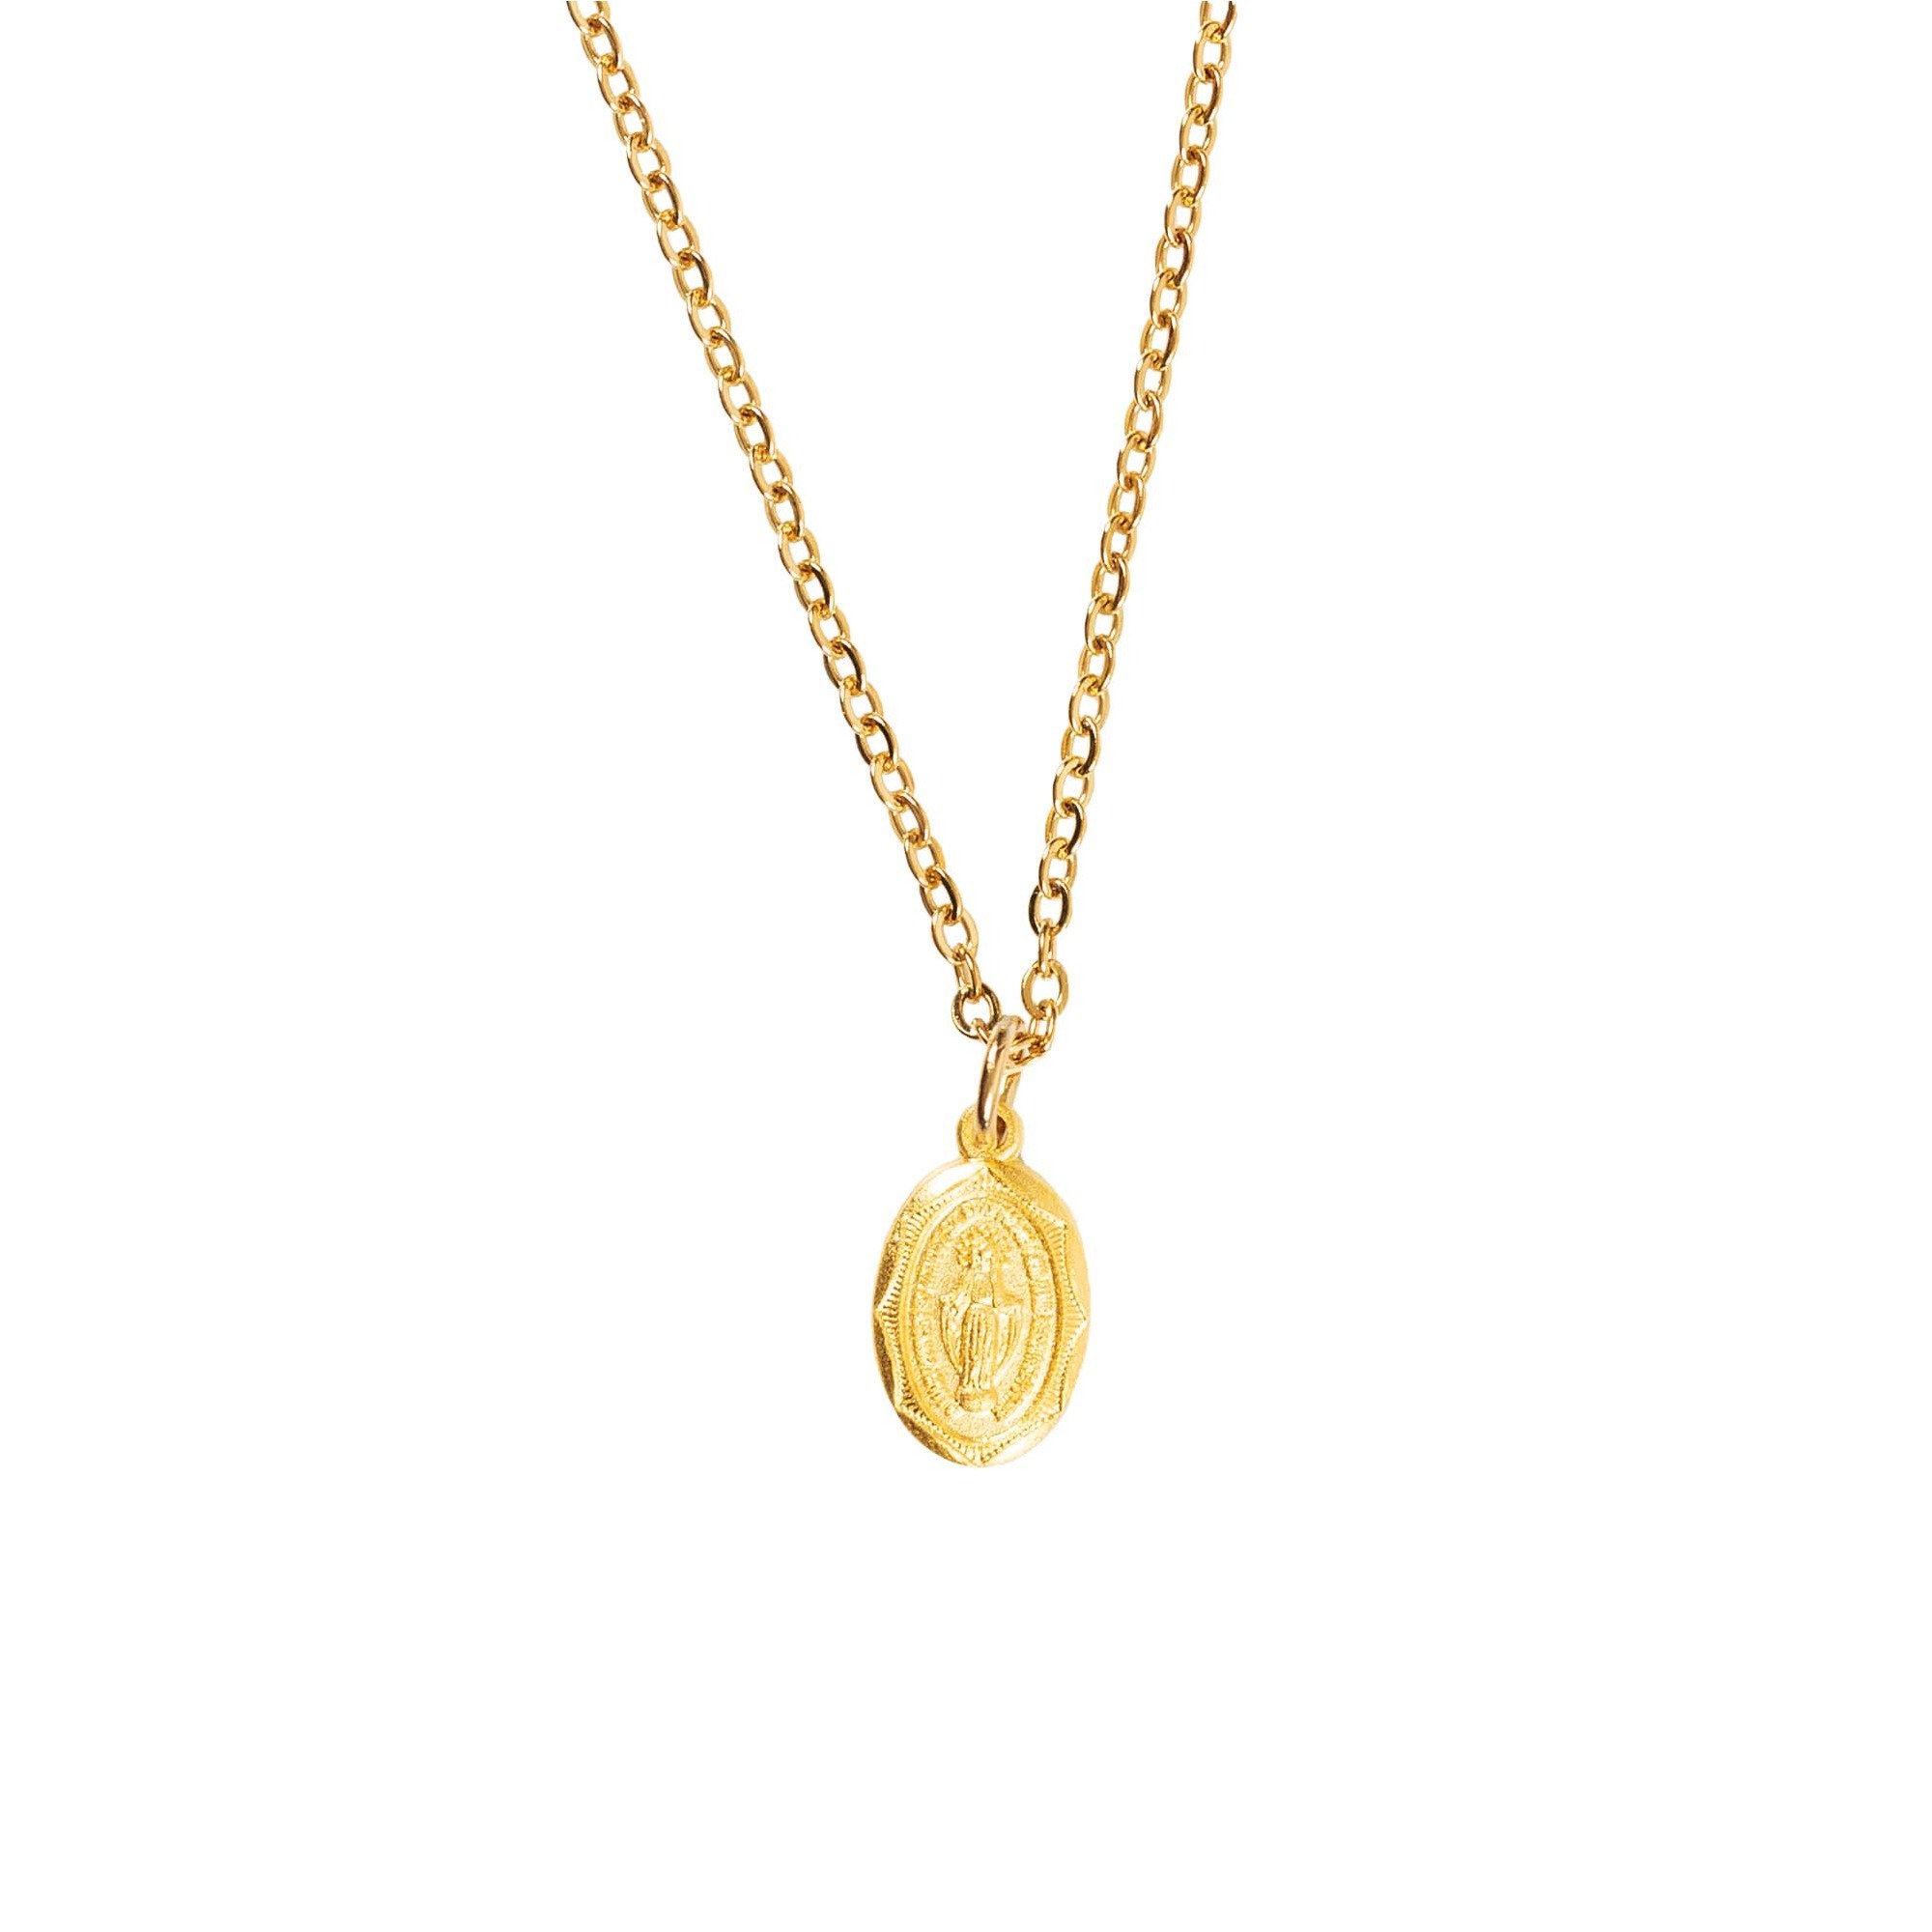 Petite Gold Over Sterling Miraculous Medal Necklace | The Catholic Company®